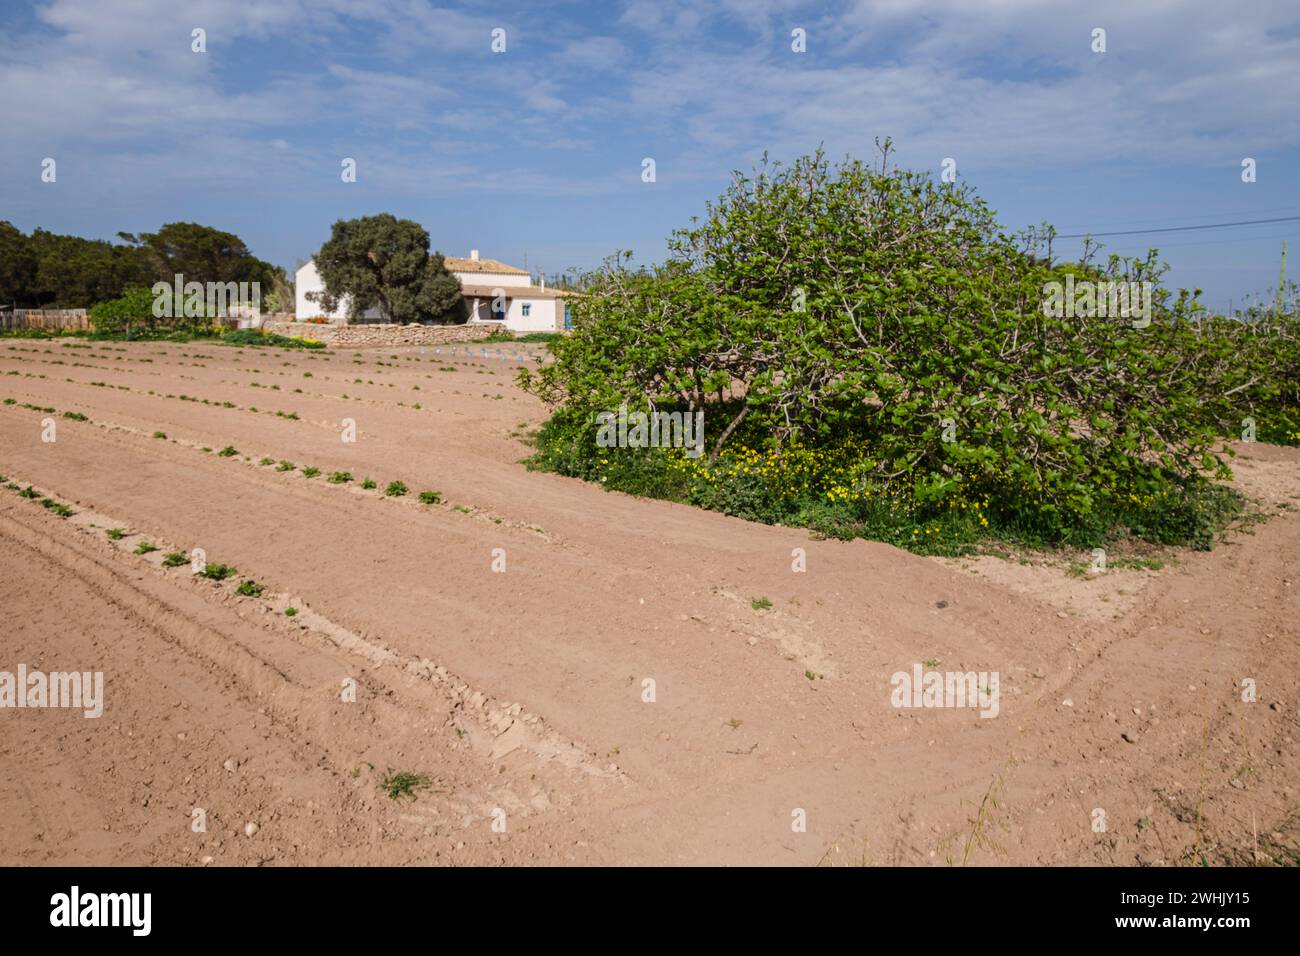 Vegetable patch Stock Photo